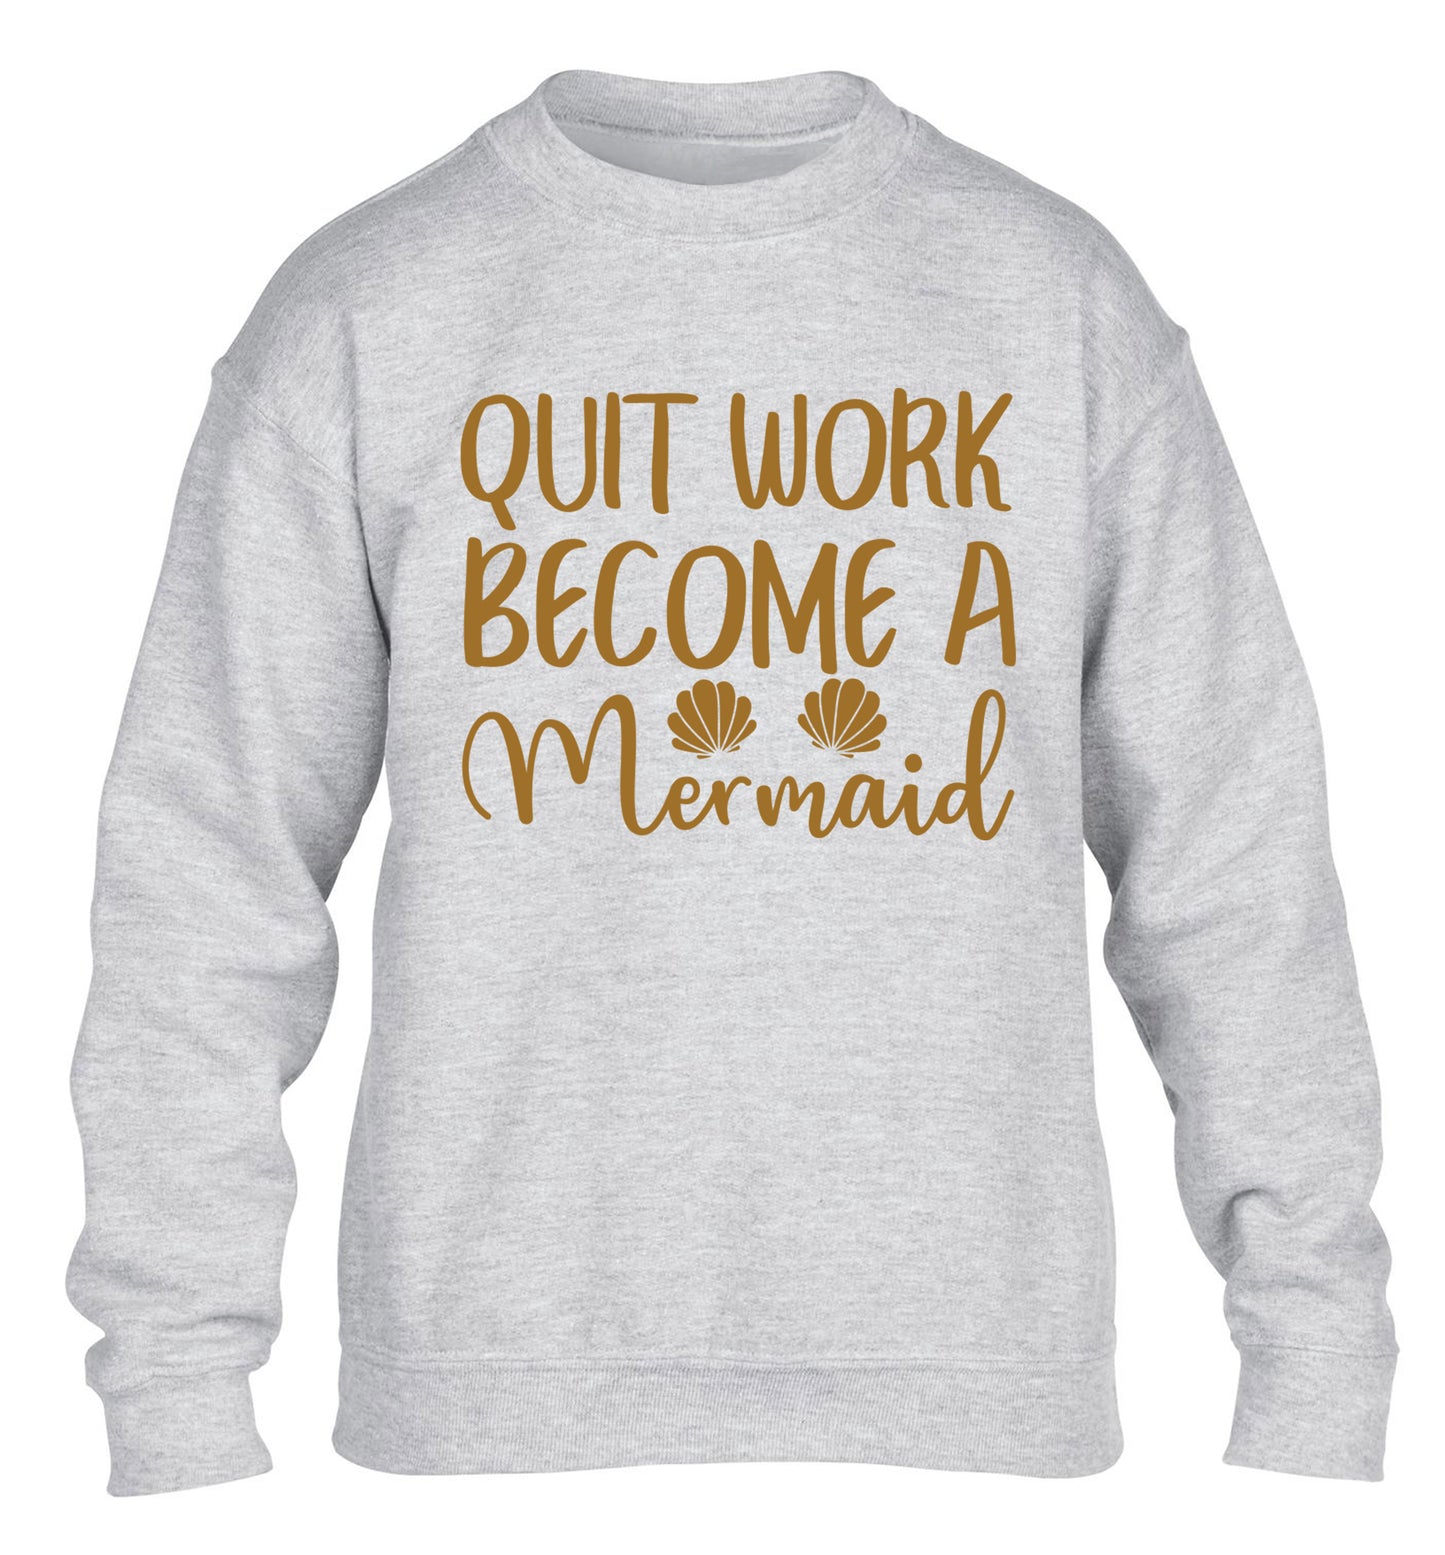 Quit work become a mermaid children's grey sweater 12-13 Years